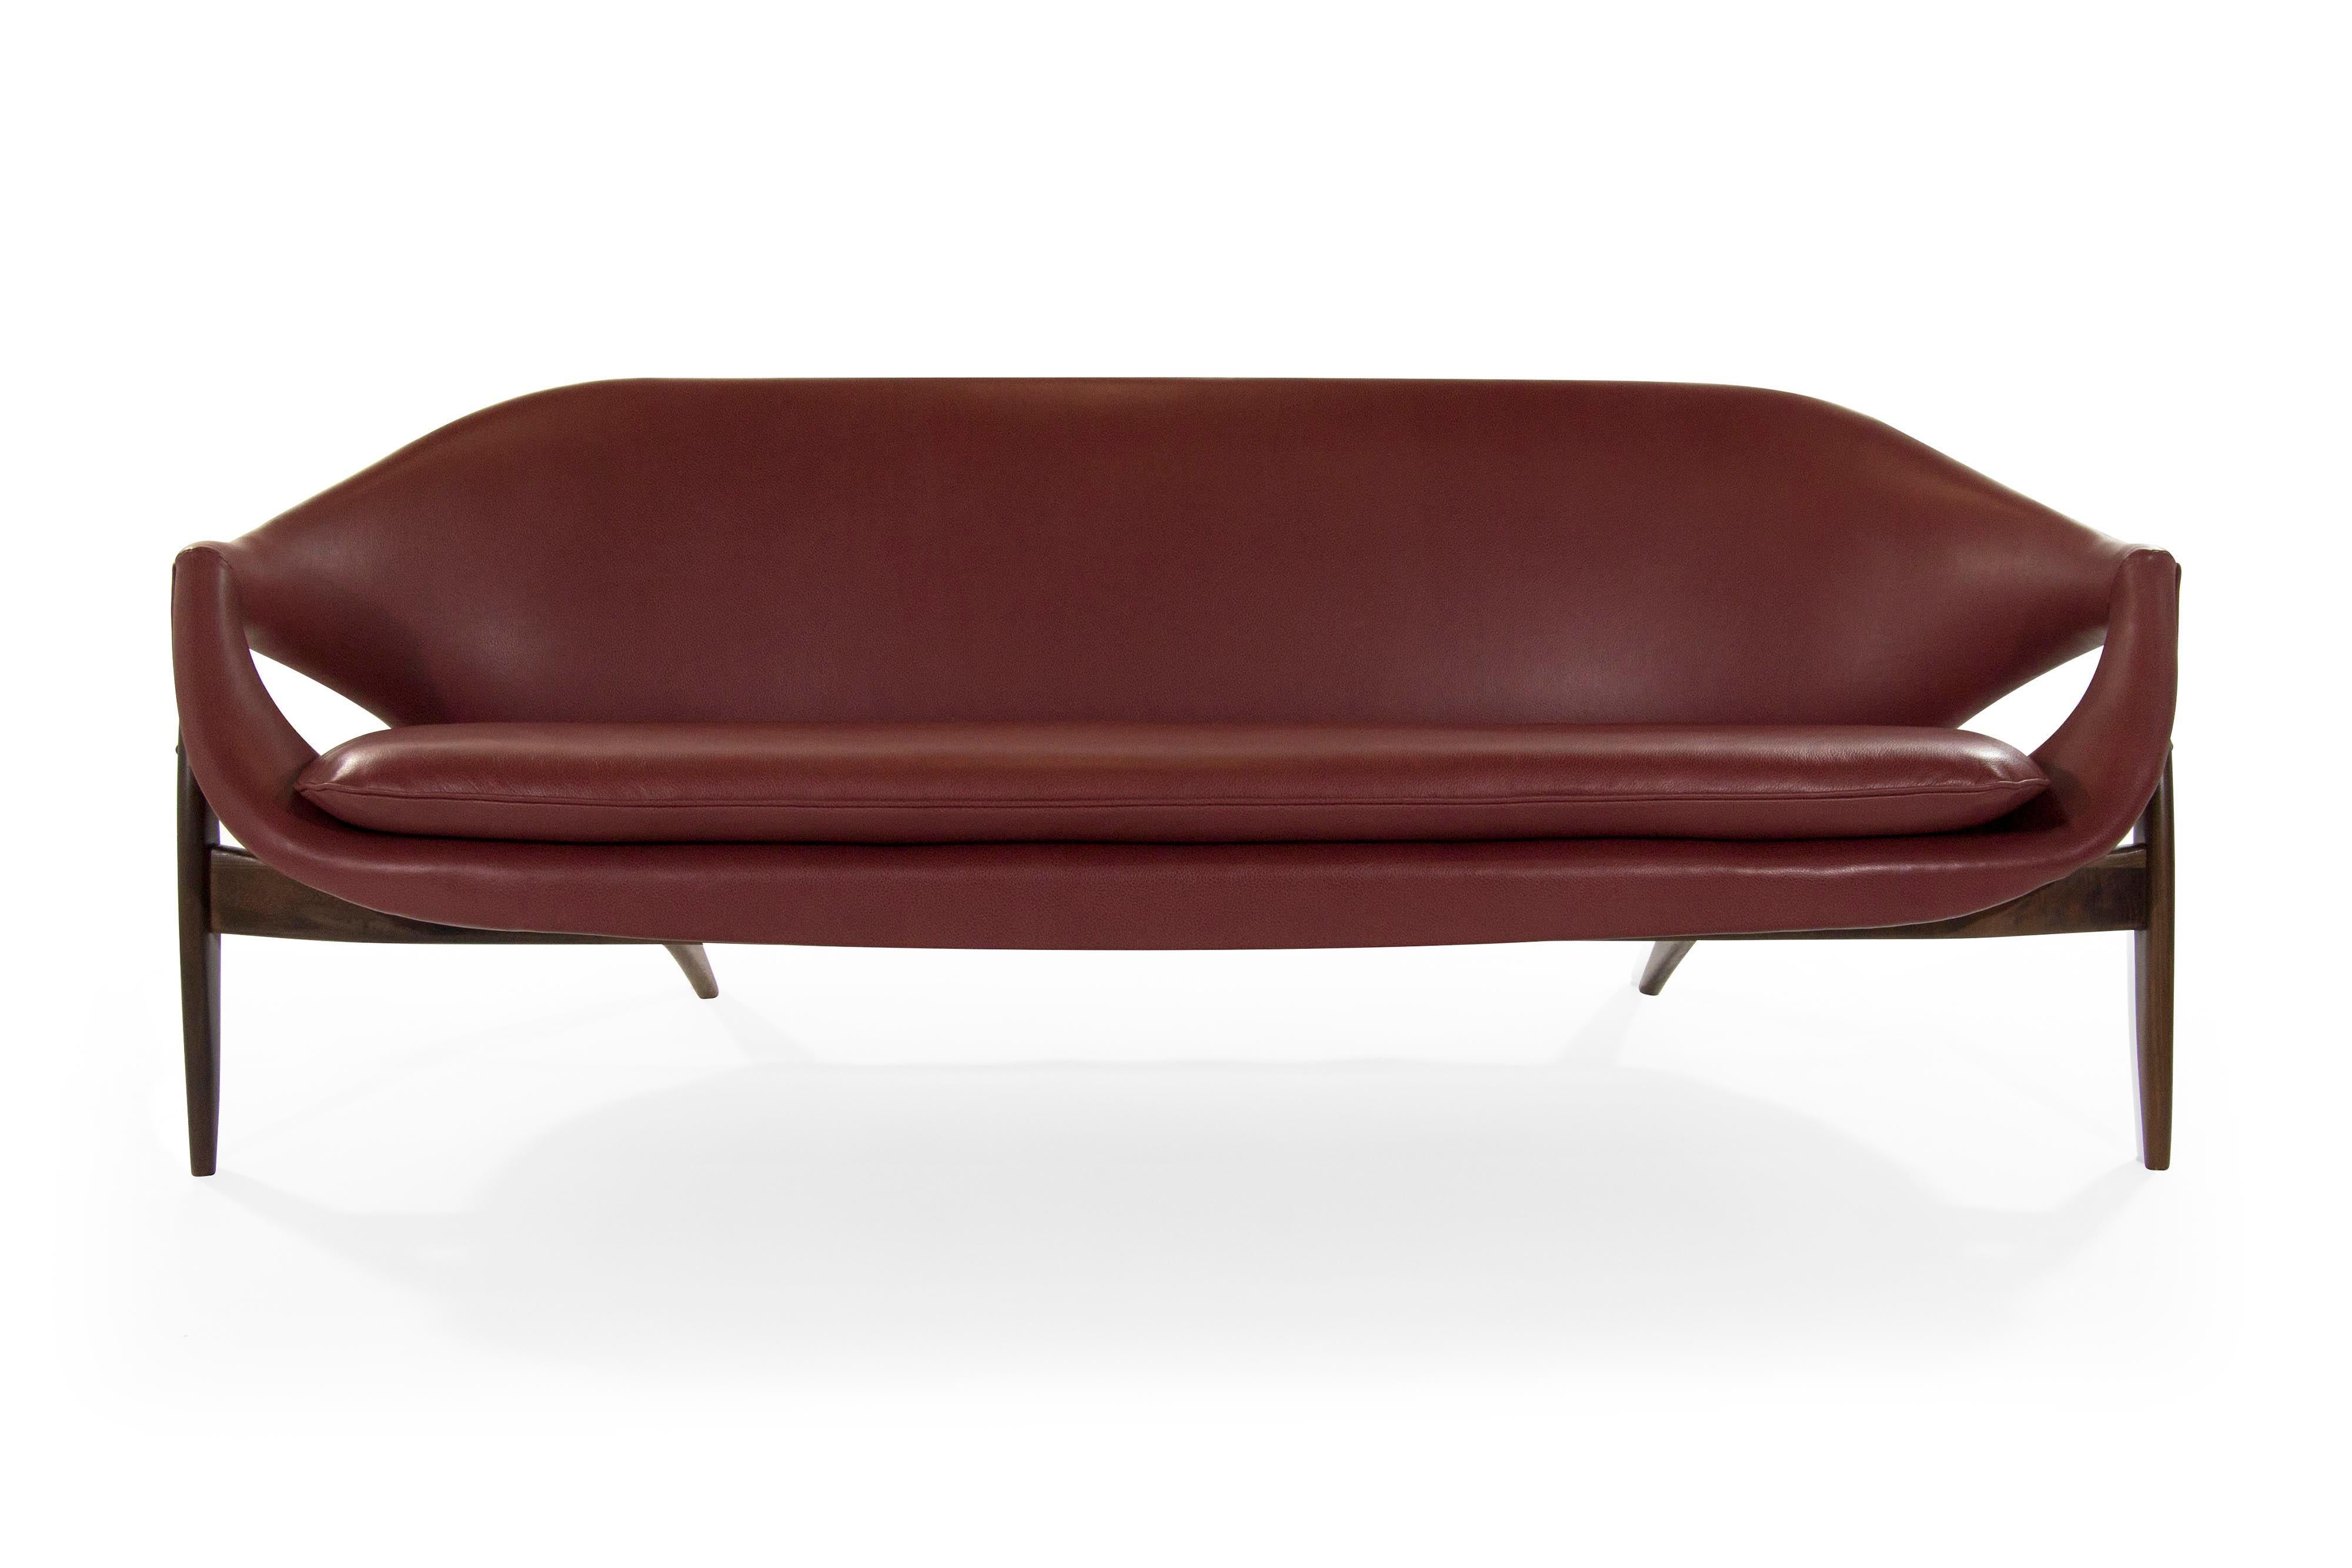 Rare sofa designed by Italy born furniture designer Luigi Tiengo and produced by the Canadian manufacturer Cimon in 1963. Sculptural shape featuring a fully restored walnut base, newly upholstered in chianti leather. Striking from all angles.